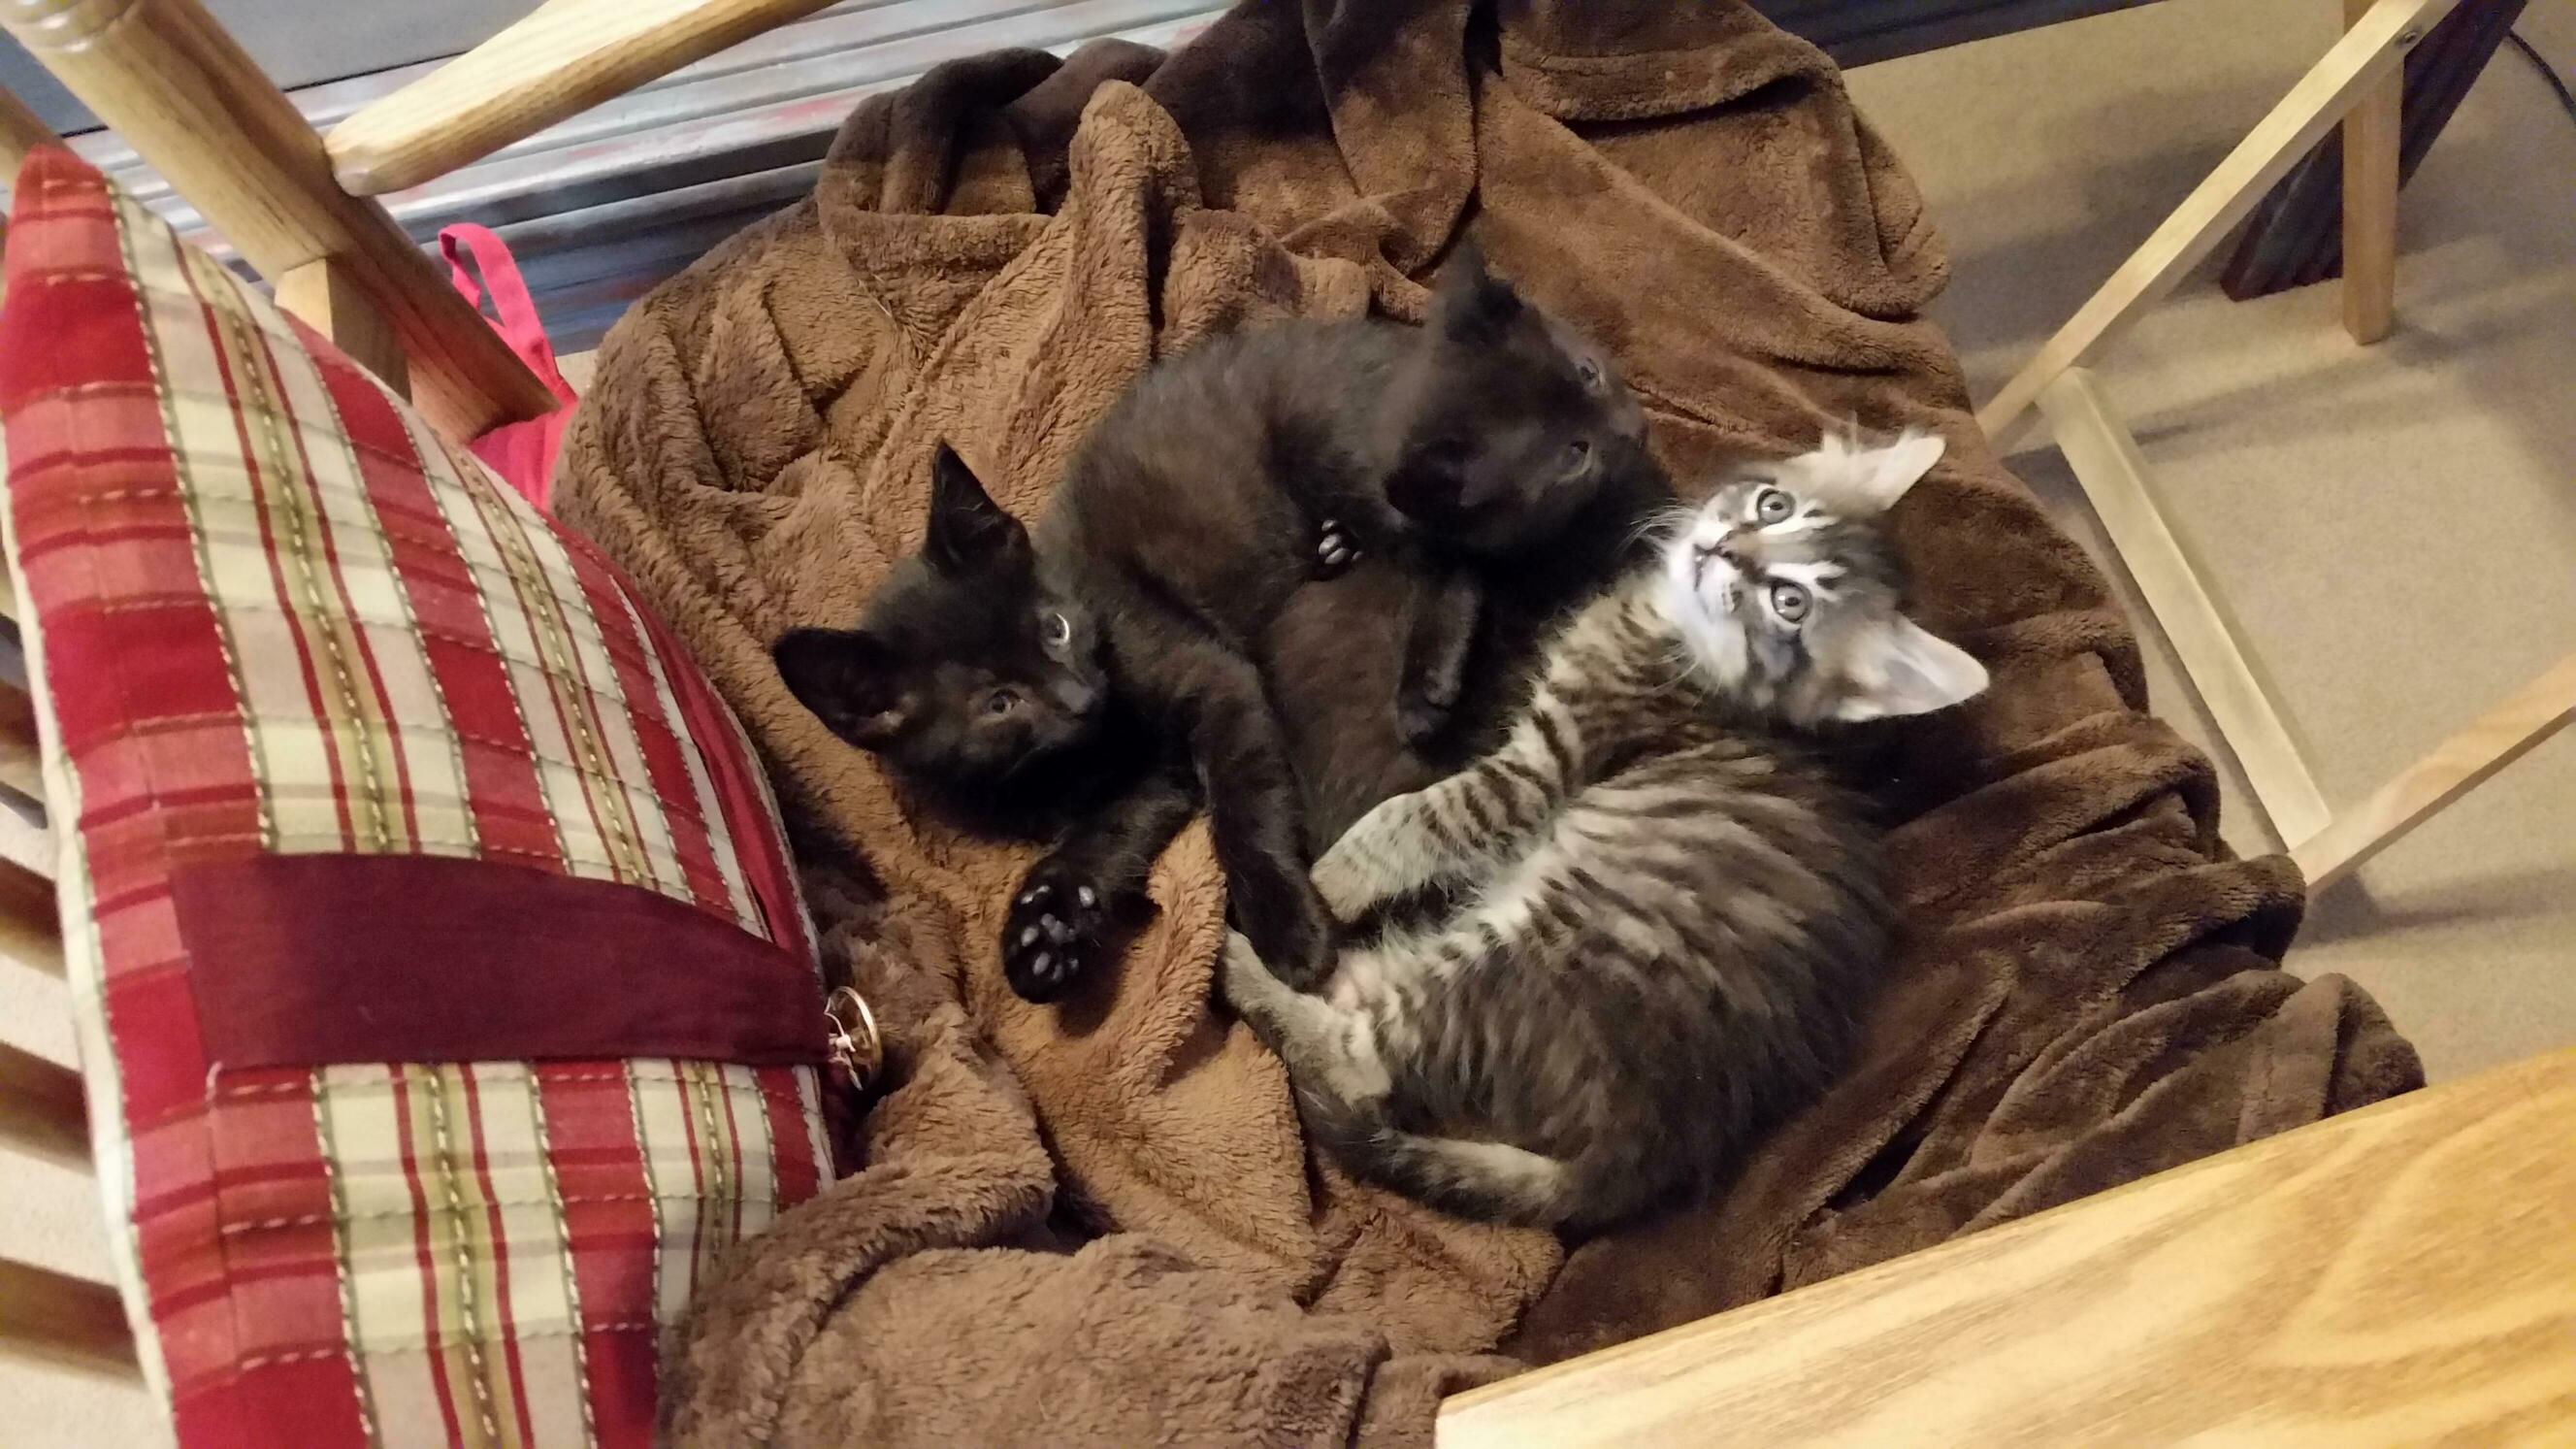 Today is our last day fostering these guys, and my wife is not taking it well.